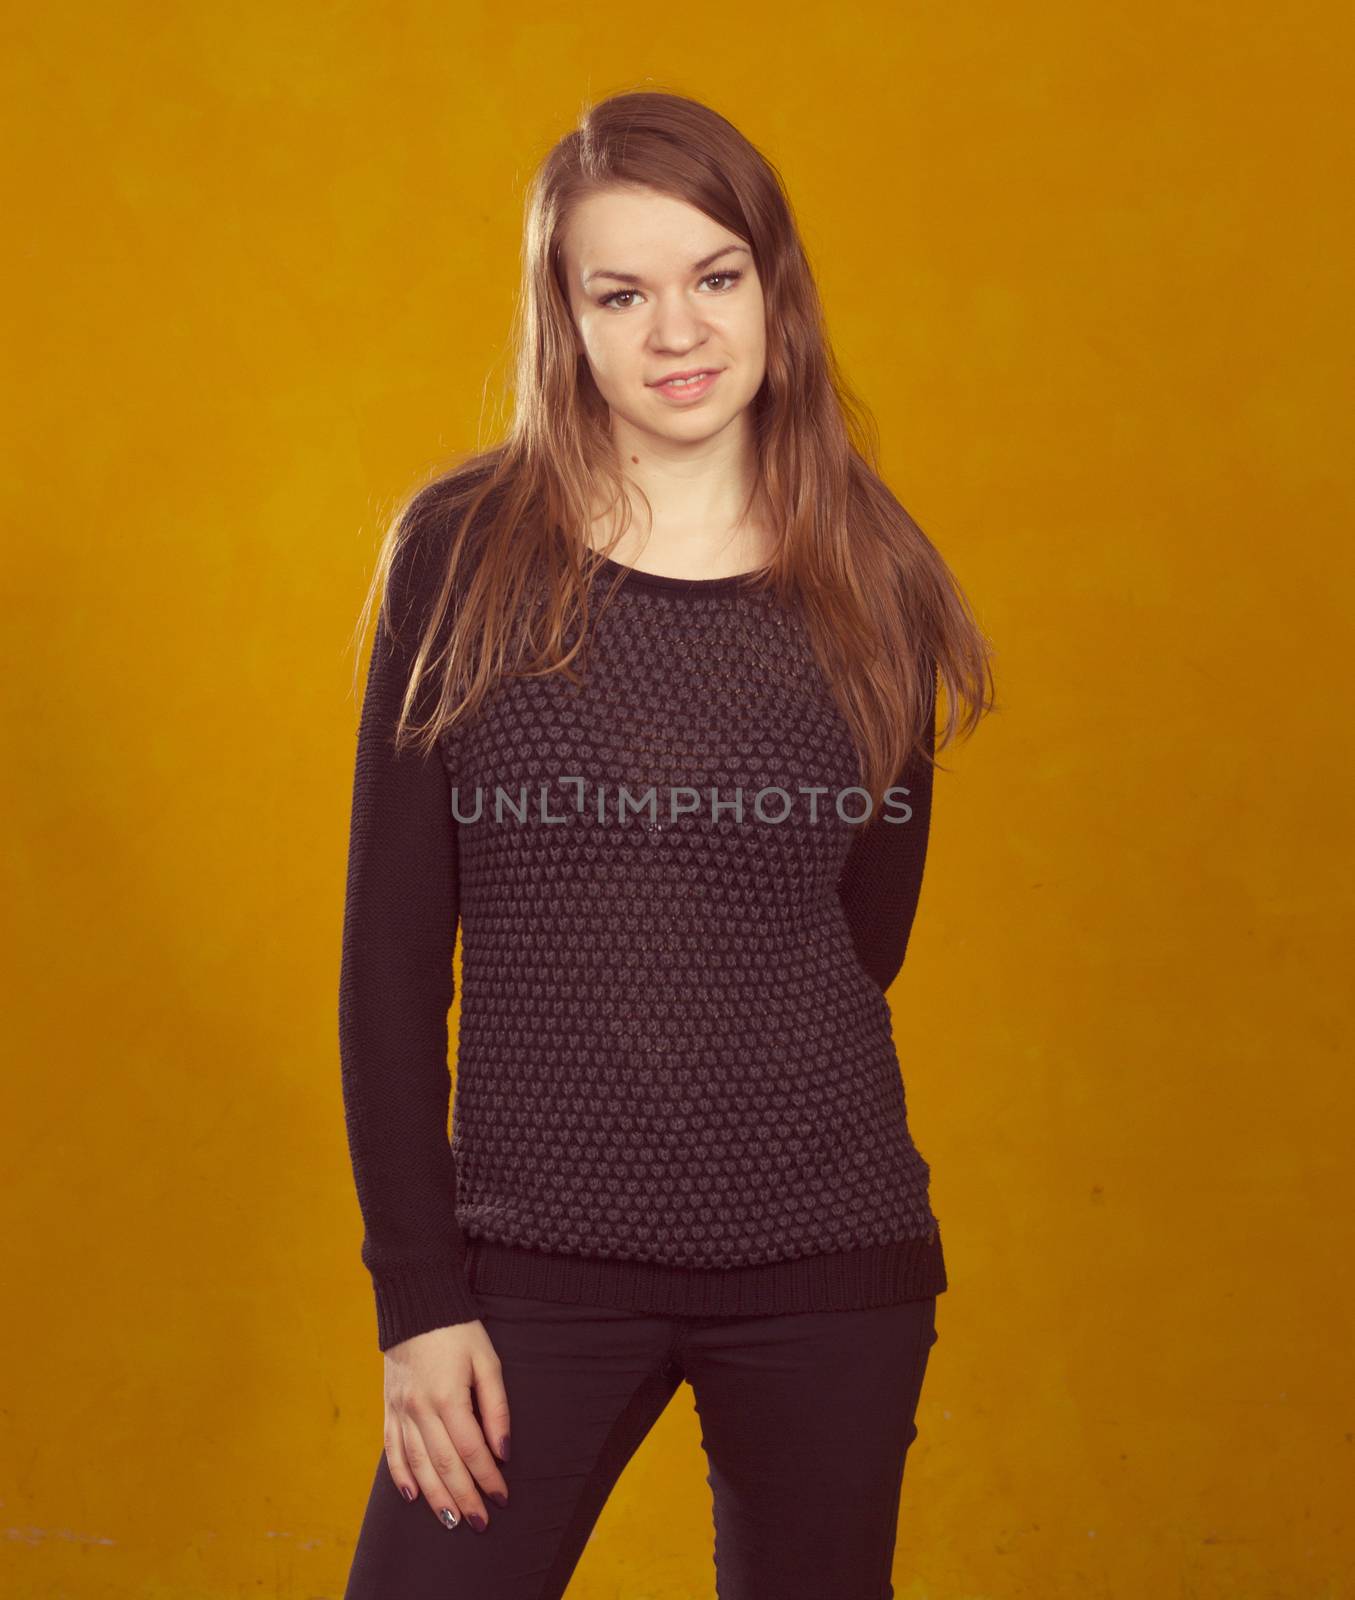 portrait of a beautiful  girl on a background of orange wall